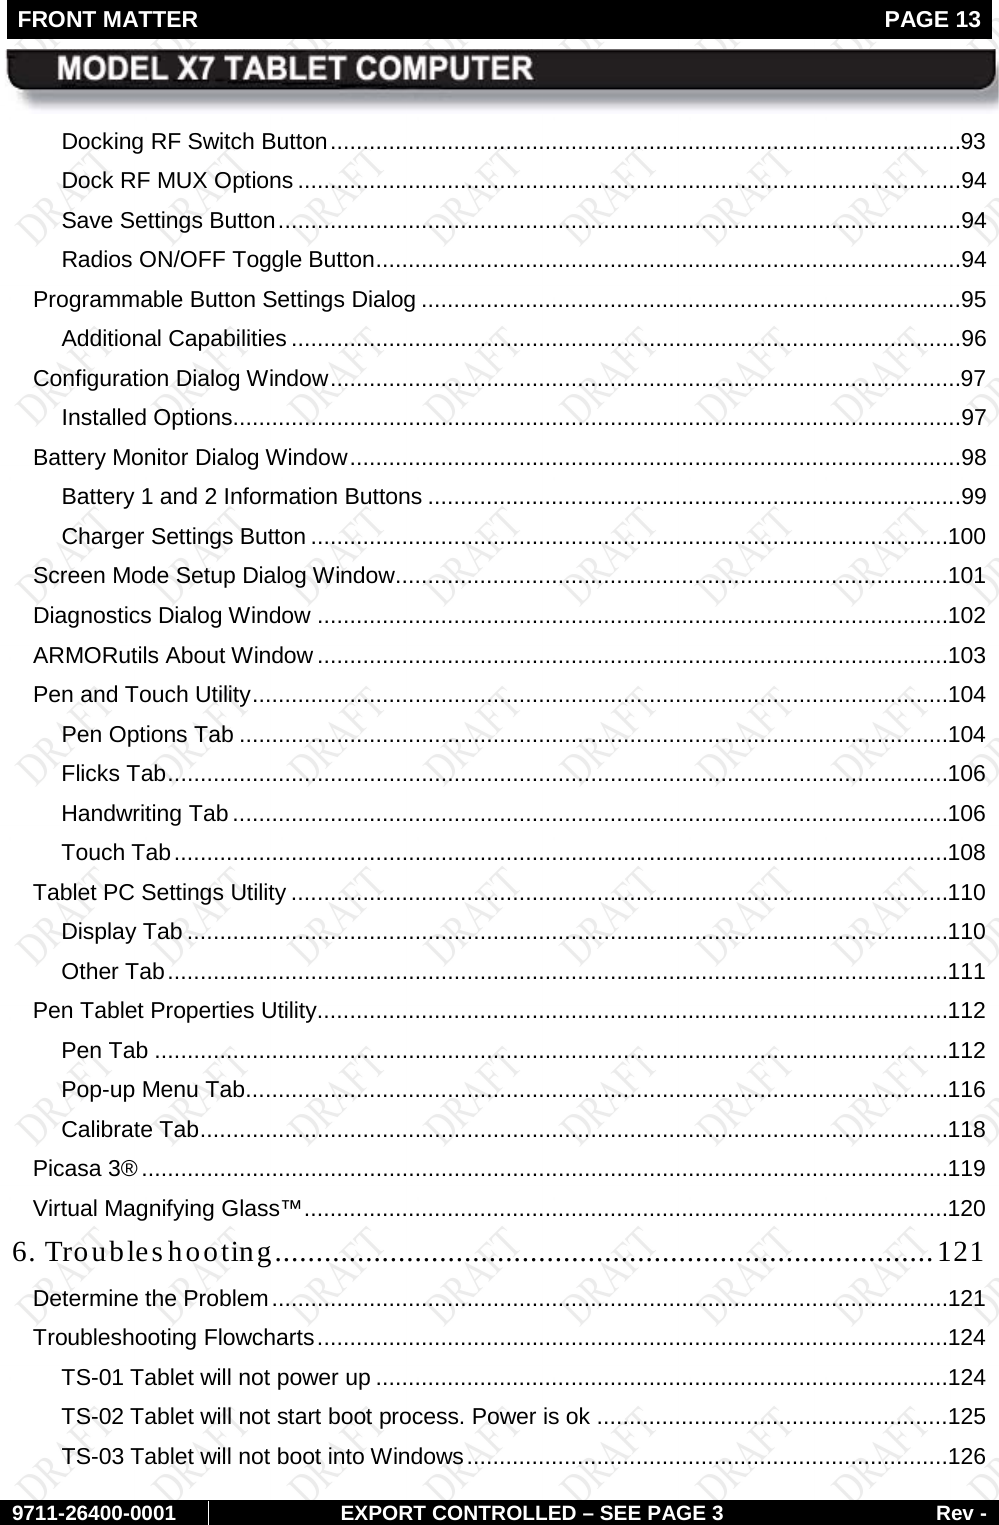 FRONT MATTER   PAGE 13        9711-26400-0001 EXPORT CONTROLLED – SEE PAGE 3 Rev - Docking RF Switch Button .................................................................................................93 Dock RF MUX Options ......................................................................................................94 Save Settings Button .........................................................................................................94 Radios ON/OFF Toggle Button ..........................................................................................94 Programmable Button Settings Dialog ...................................................................................95 Additional Capabilities .......................................................................................................96 Configuration Dialog Window .................................................................................................97 Installed Options ................................................................................................................97 Battery Monitor Dialog Window ..............................................................................................98 Battery 1 and 2 Information Buttons ..................................................................................99 Charger Settings Button .................................................................................................. 100 Screen Mode Setup Dialog Window ..................................................................................... 101 Diagnostics Dialog Window ................................................................................................. 102 ARMORutils About Window ................................................................................................. 103 Pen and Touch Utility ........................................................................................................... 104 Pen Options Tab ............................................................................................................. 104 Flicks Tab ........................................................................................................................ 106 Handwriting Tab .............................................................................................................. 106 Touch Tab ....................................................................................................................... 108 Tablet PC Settings Utility ..................................................................................................... 110 Display Tab ..................................................................................................................... 110 Other Tab ........................................................................................................................ 111 Pen Tablet Properties Utility................................................................................................. 112 Pen Tab .......................................................................................................................... 112 Pop-up Menu Tab ............................................................................................................ 116 Calibrate Tab ................................................................................................................... 118 Picasa 3® ............................................................................................................................ 119 Virtual Magnifying Glass™ ................................................................................................... 120 6. Troubleshooting................................................................................ 121 Determine the Problem ........................................................................................................ 121 Troubleshooting Flowcharts ................................................................................................. 124 TS-01 Tablet will not power up ........................................................................................ 124 TS-02 Tablet will not start boot process. Power is ok ...................................................... 125 TS-03 Tablet will not boot into Windows .......................................................................... 126 